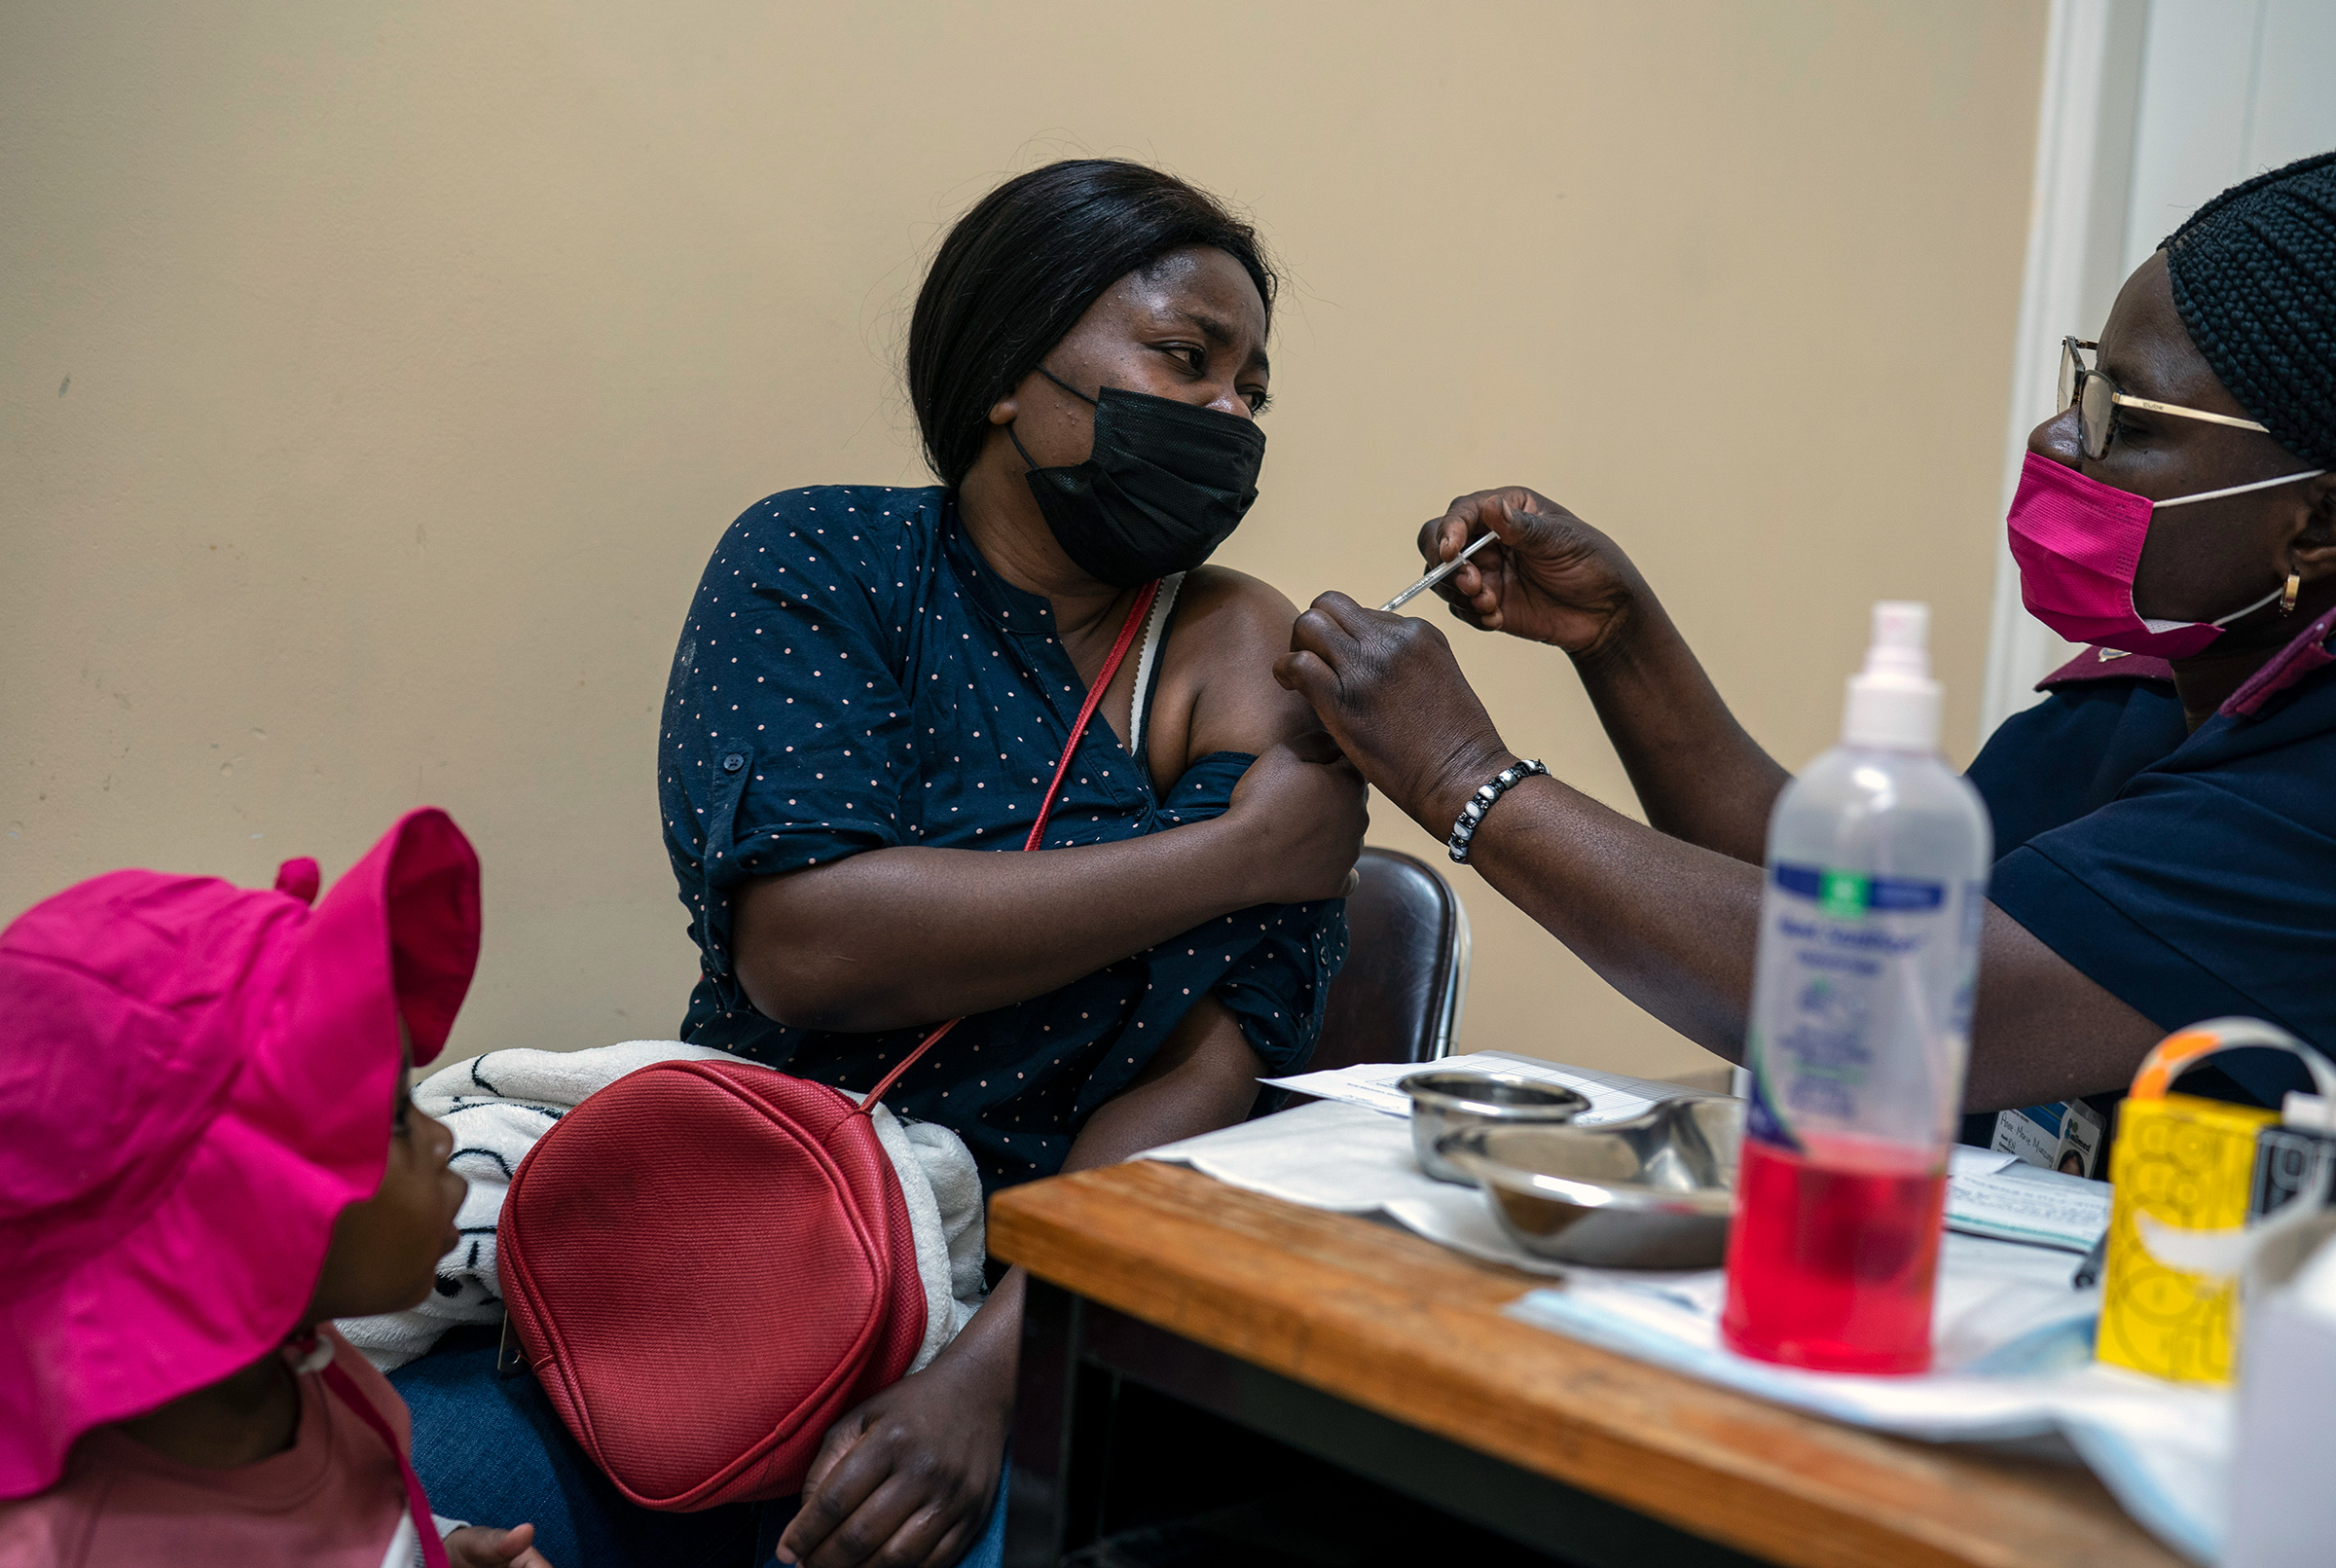 A woman receives a dose of COVID-19 vaccine in Johannesburg, South Africa, on Tuesday, Nov. 30, 2021. Vaccines are finally available in many African countries, but some people there are wary of taking them